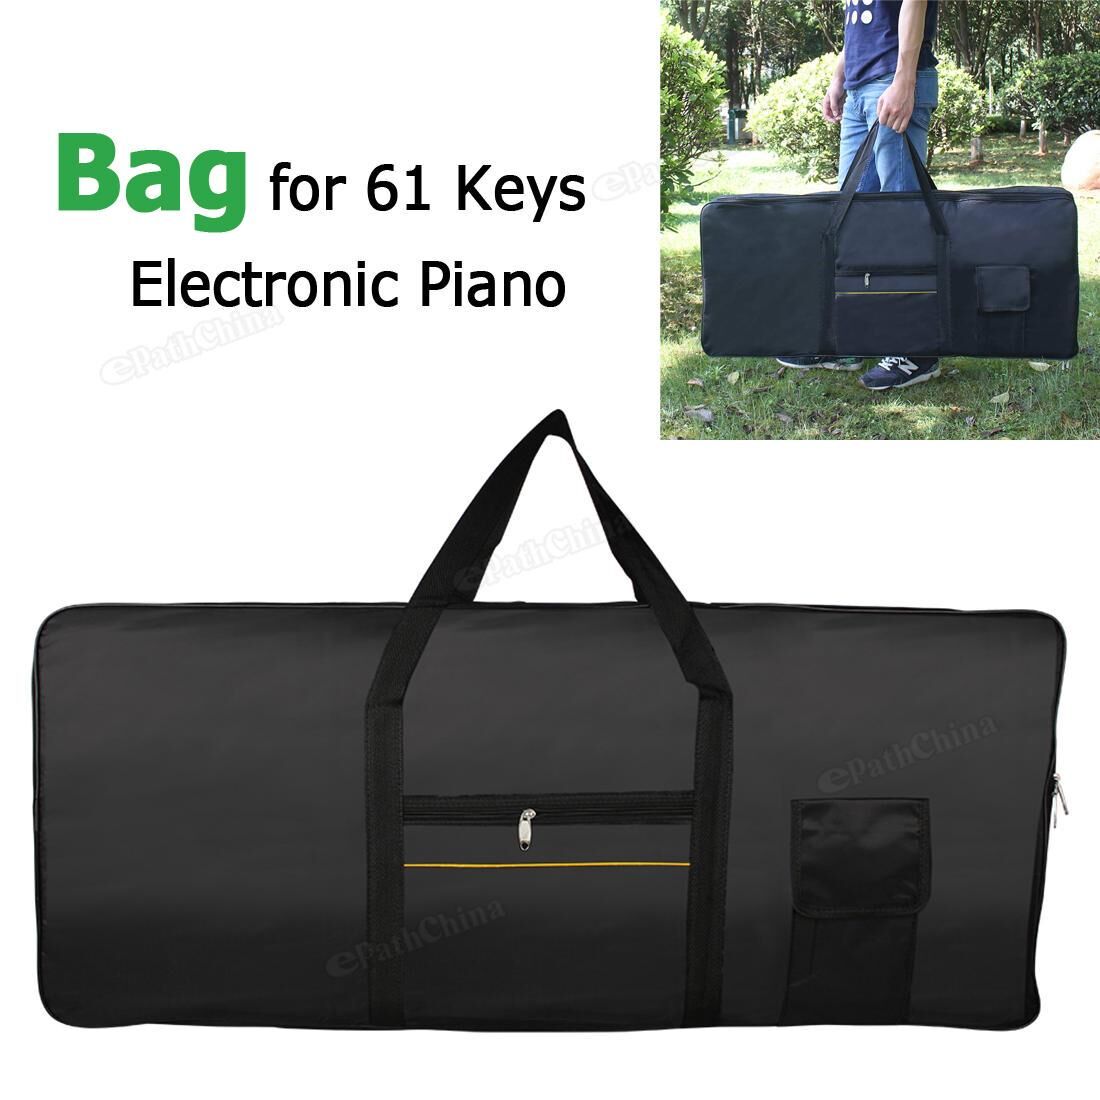 Musical 3 Portable Waterproof Electronic Organ Oxford Fabric Bag 100cm*40cm*16cm for 61 Keyboards Piano